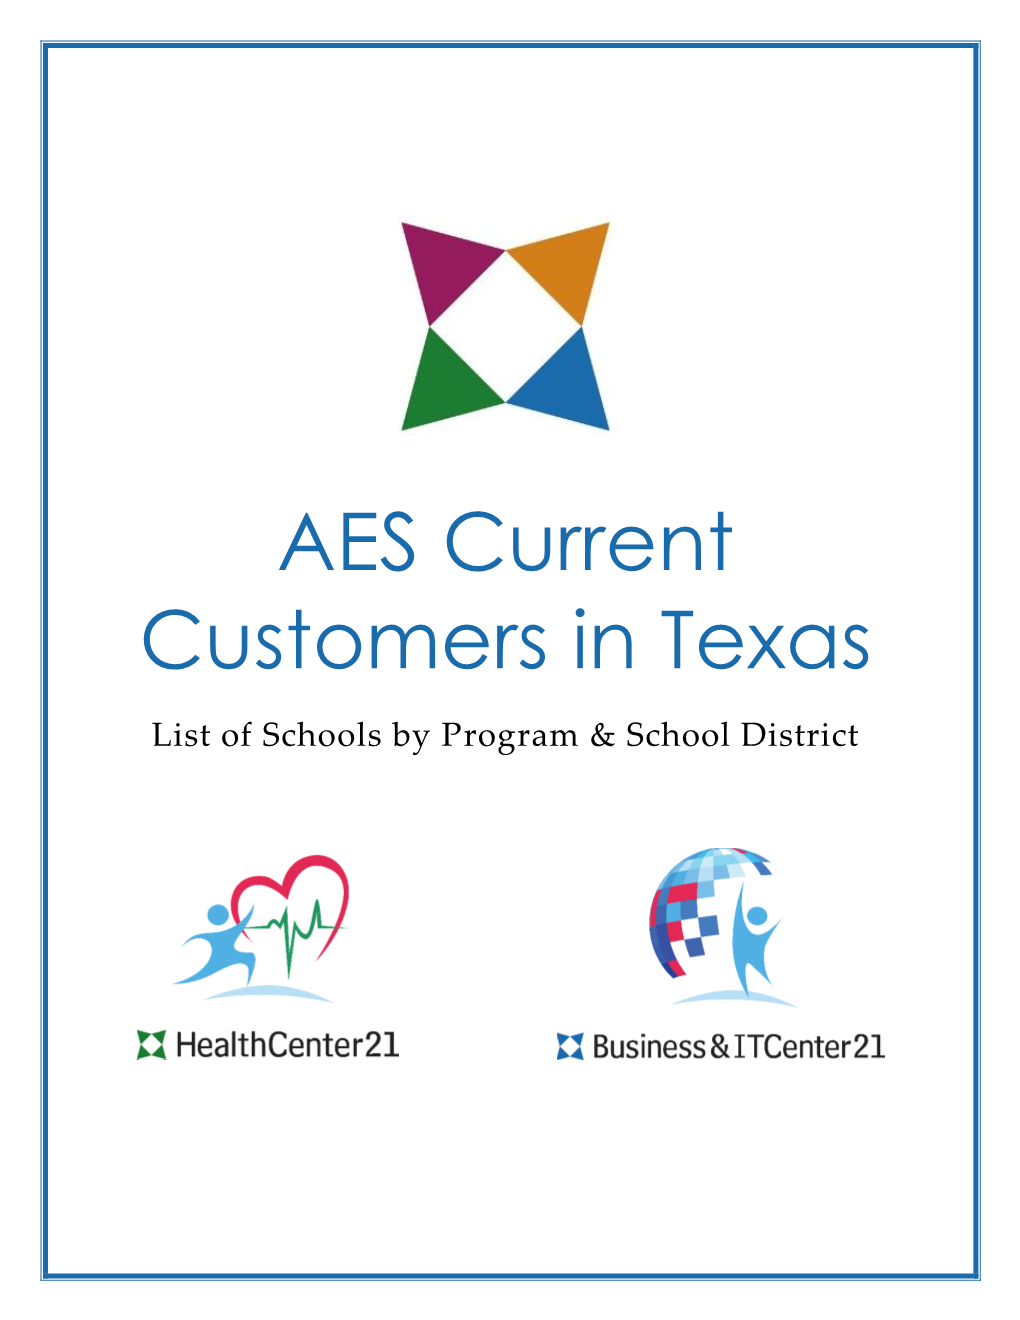 AES Current Customers in Texas